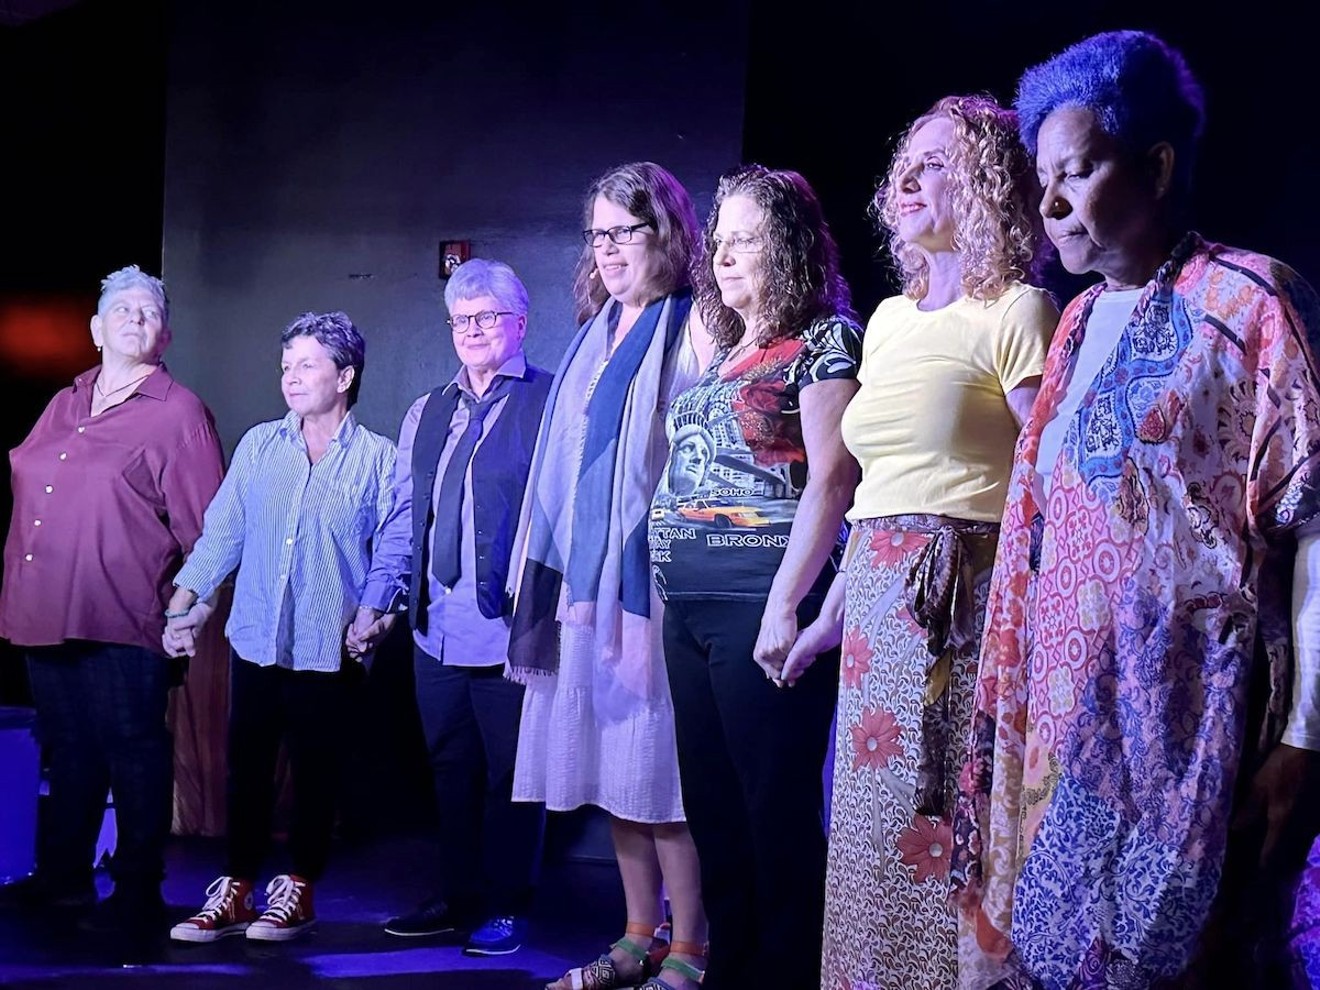 The Lesbian Thespians put on performances at ArtServe in Fort Lauderdale.